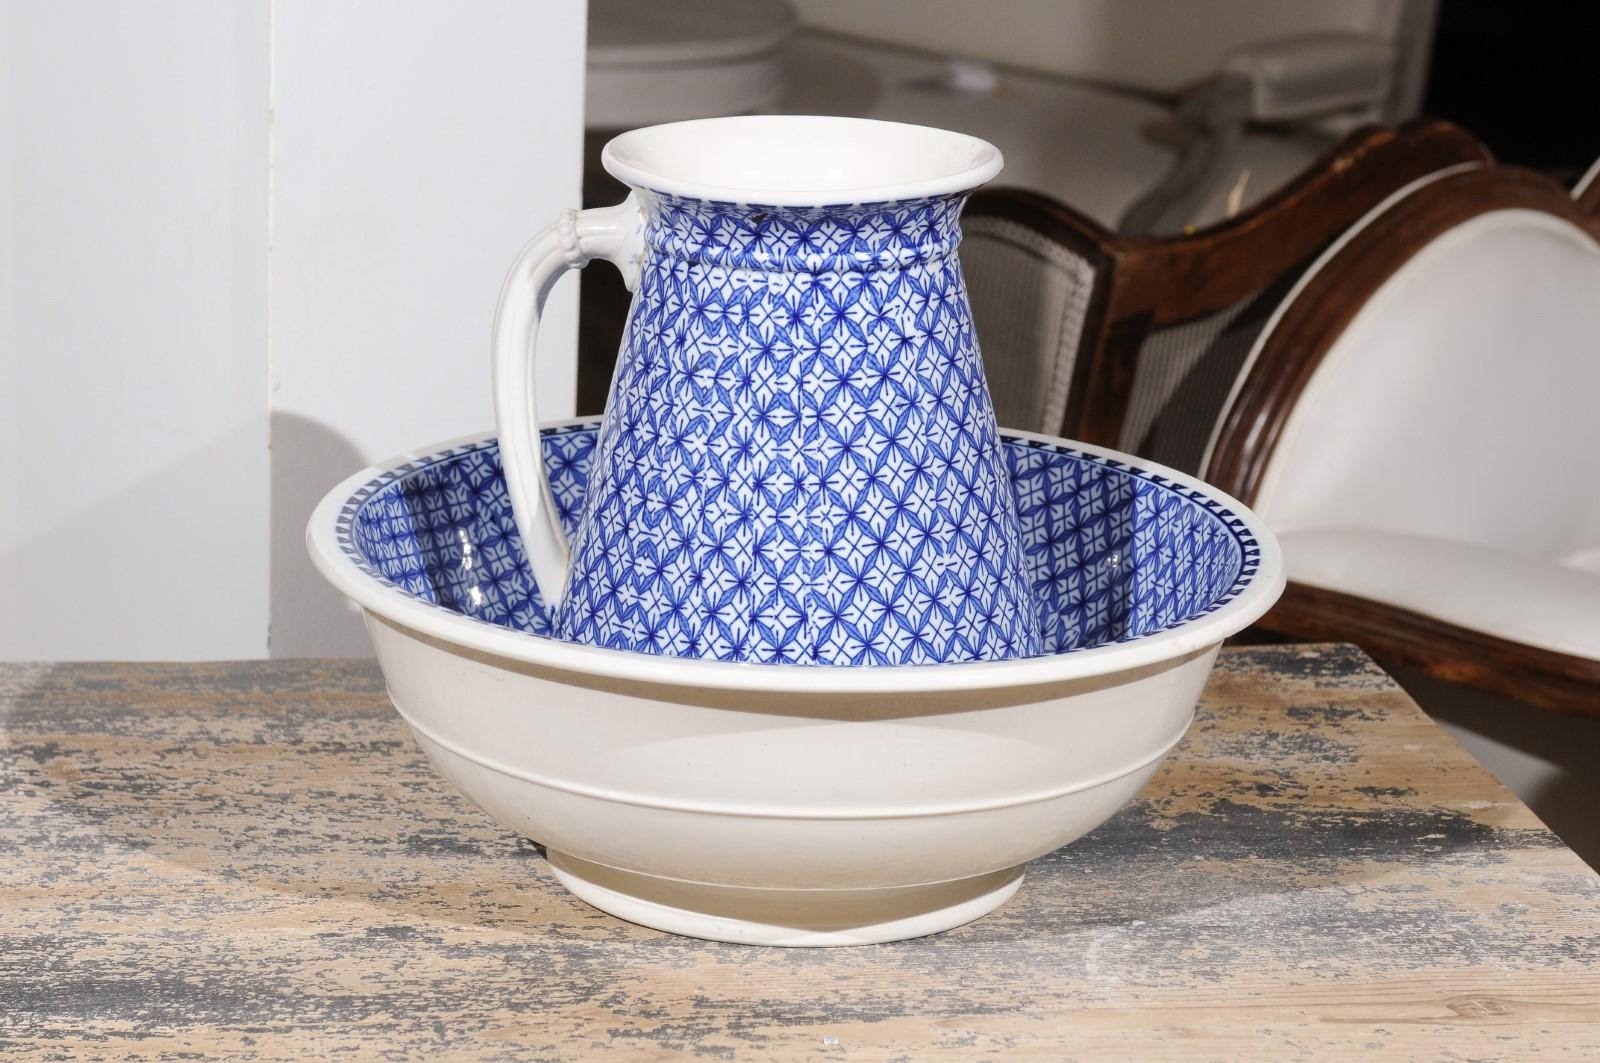 An English blue and white Brown-Westhead, Moore & Co., Valletta pattern washbasin from the late 19th century, featuring a pitcher and its basin. Created by the English manufacturer Brown-Westhead, Moore & Co. in the last quarter of the 19th century,